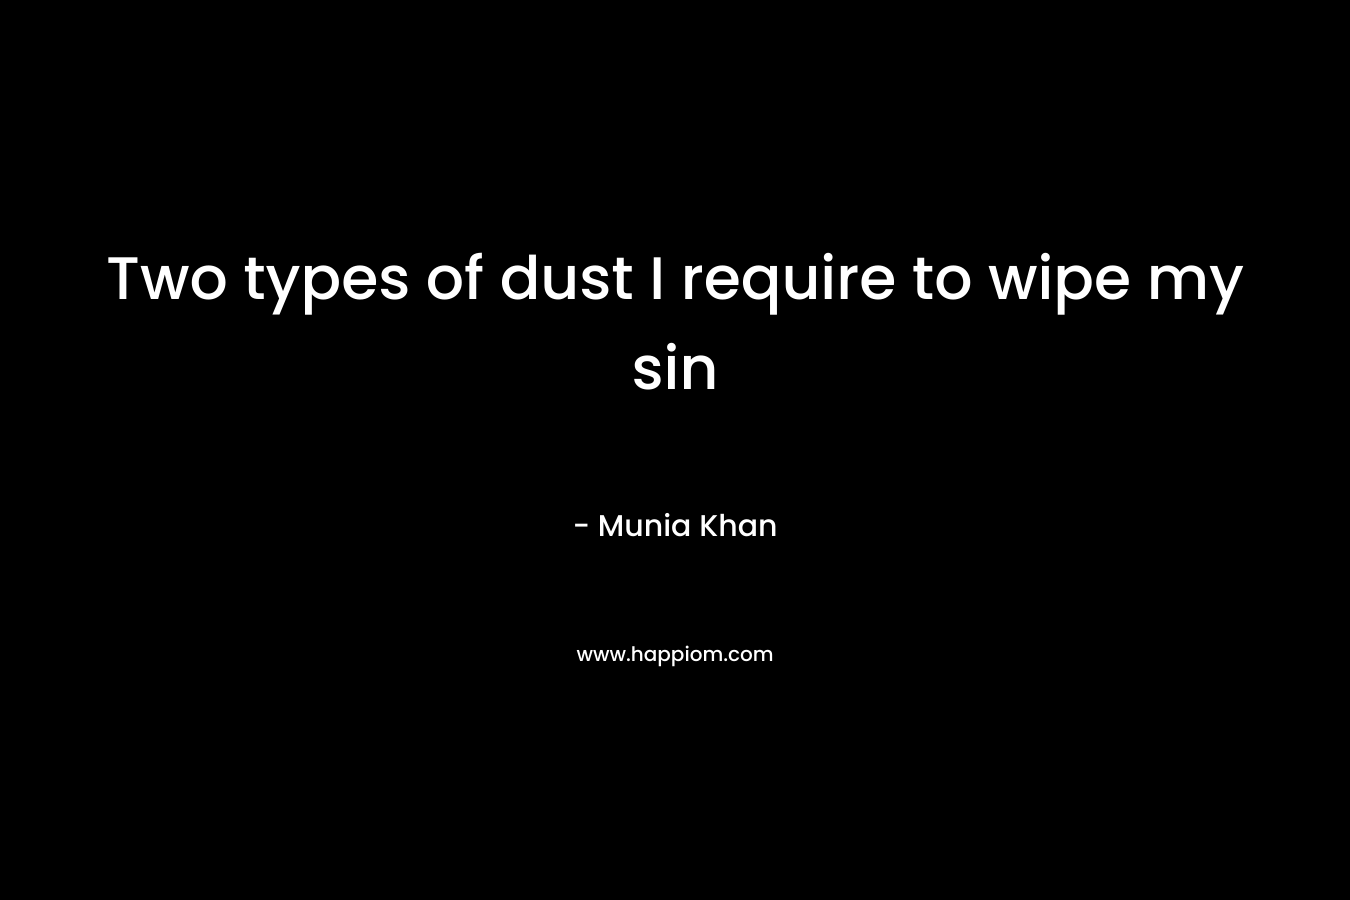 Two types of dust I require to wipe my sin